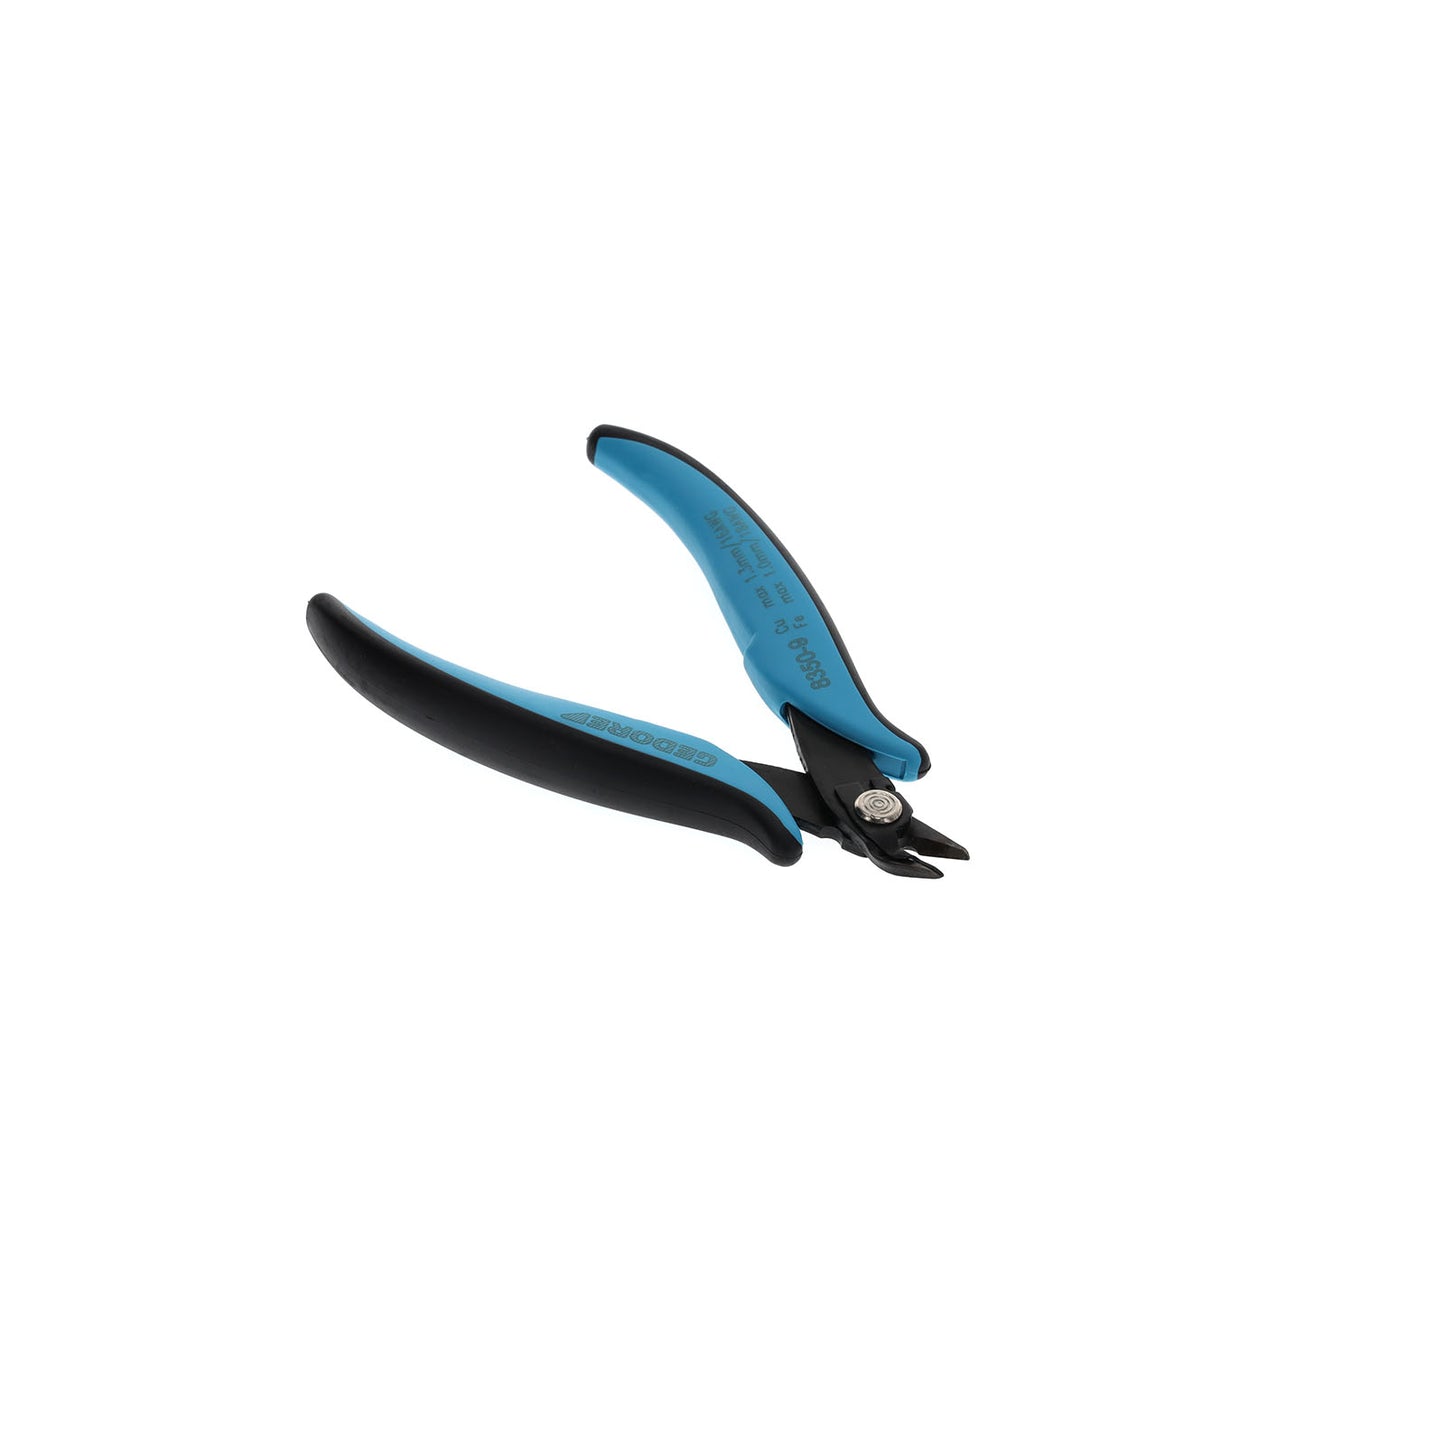 GEDORE 8350-9 - Electronic Cutting Pliers (1829033)